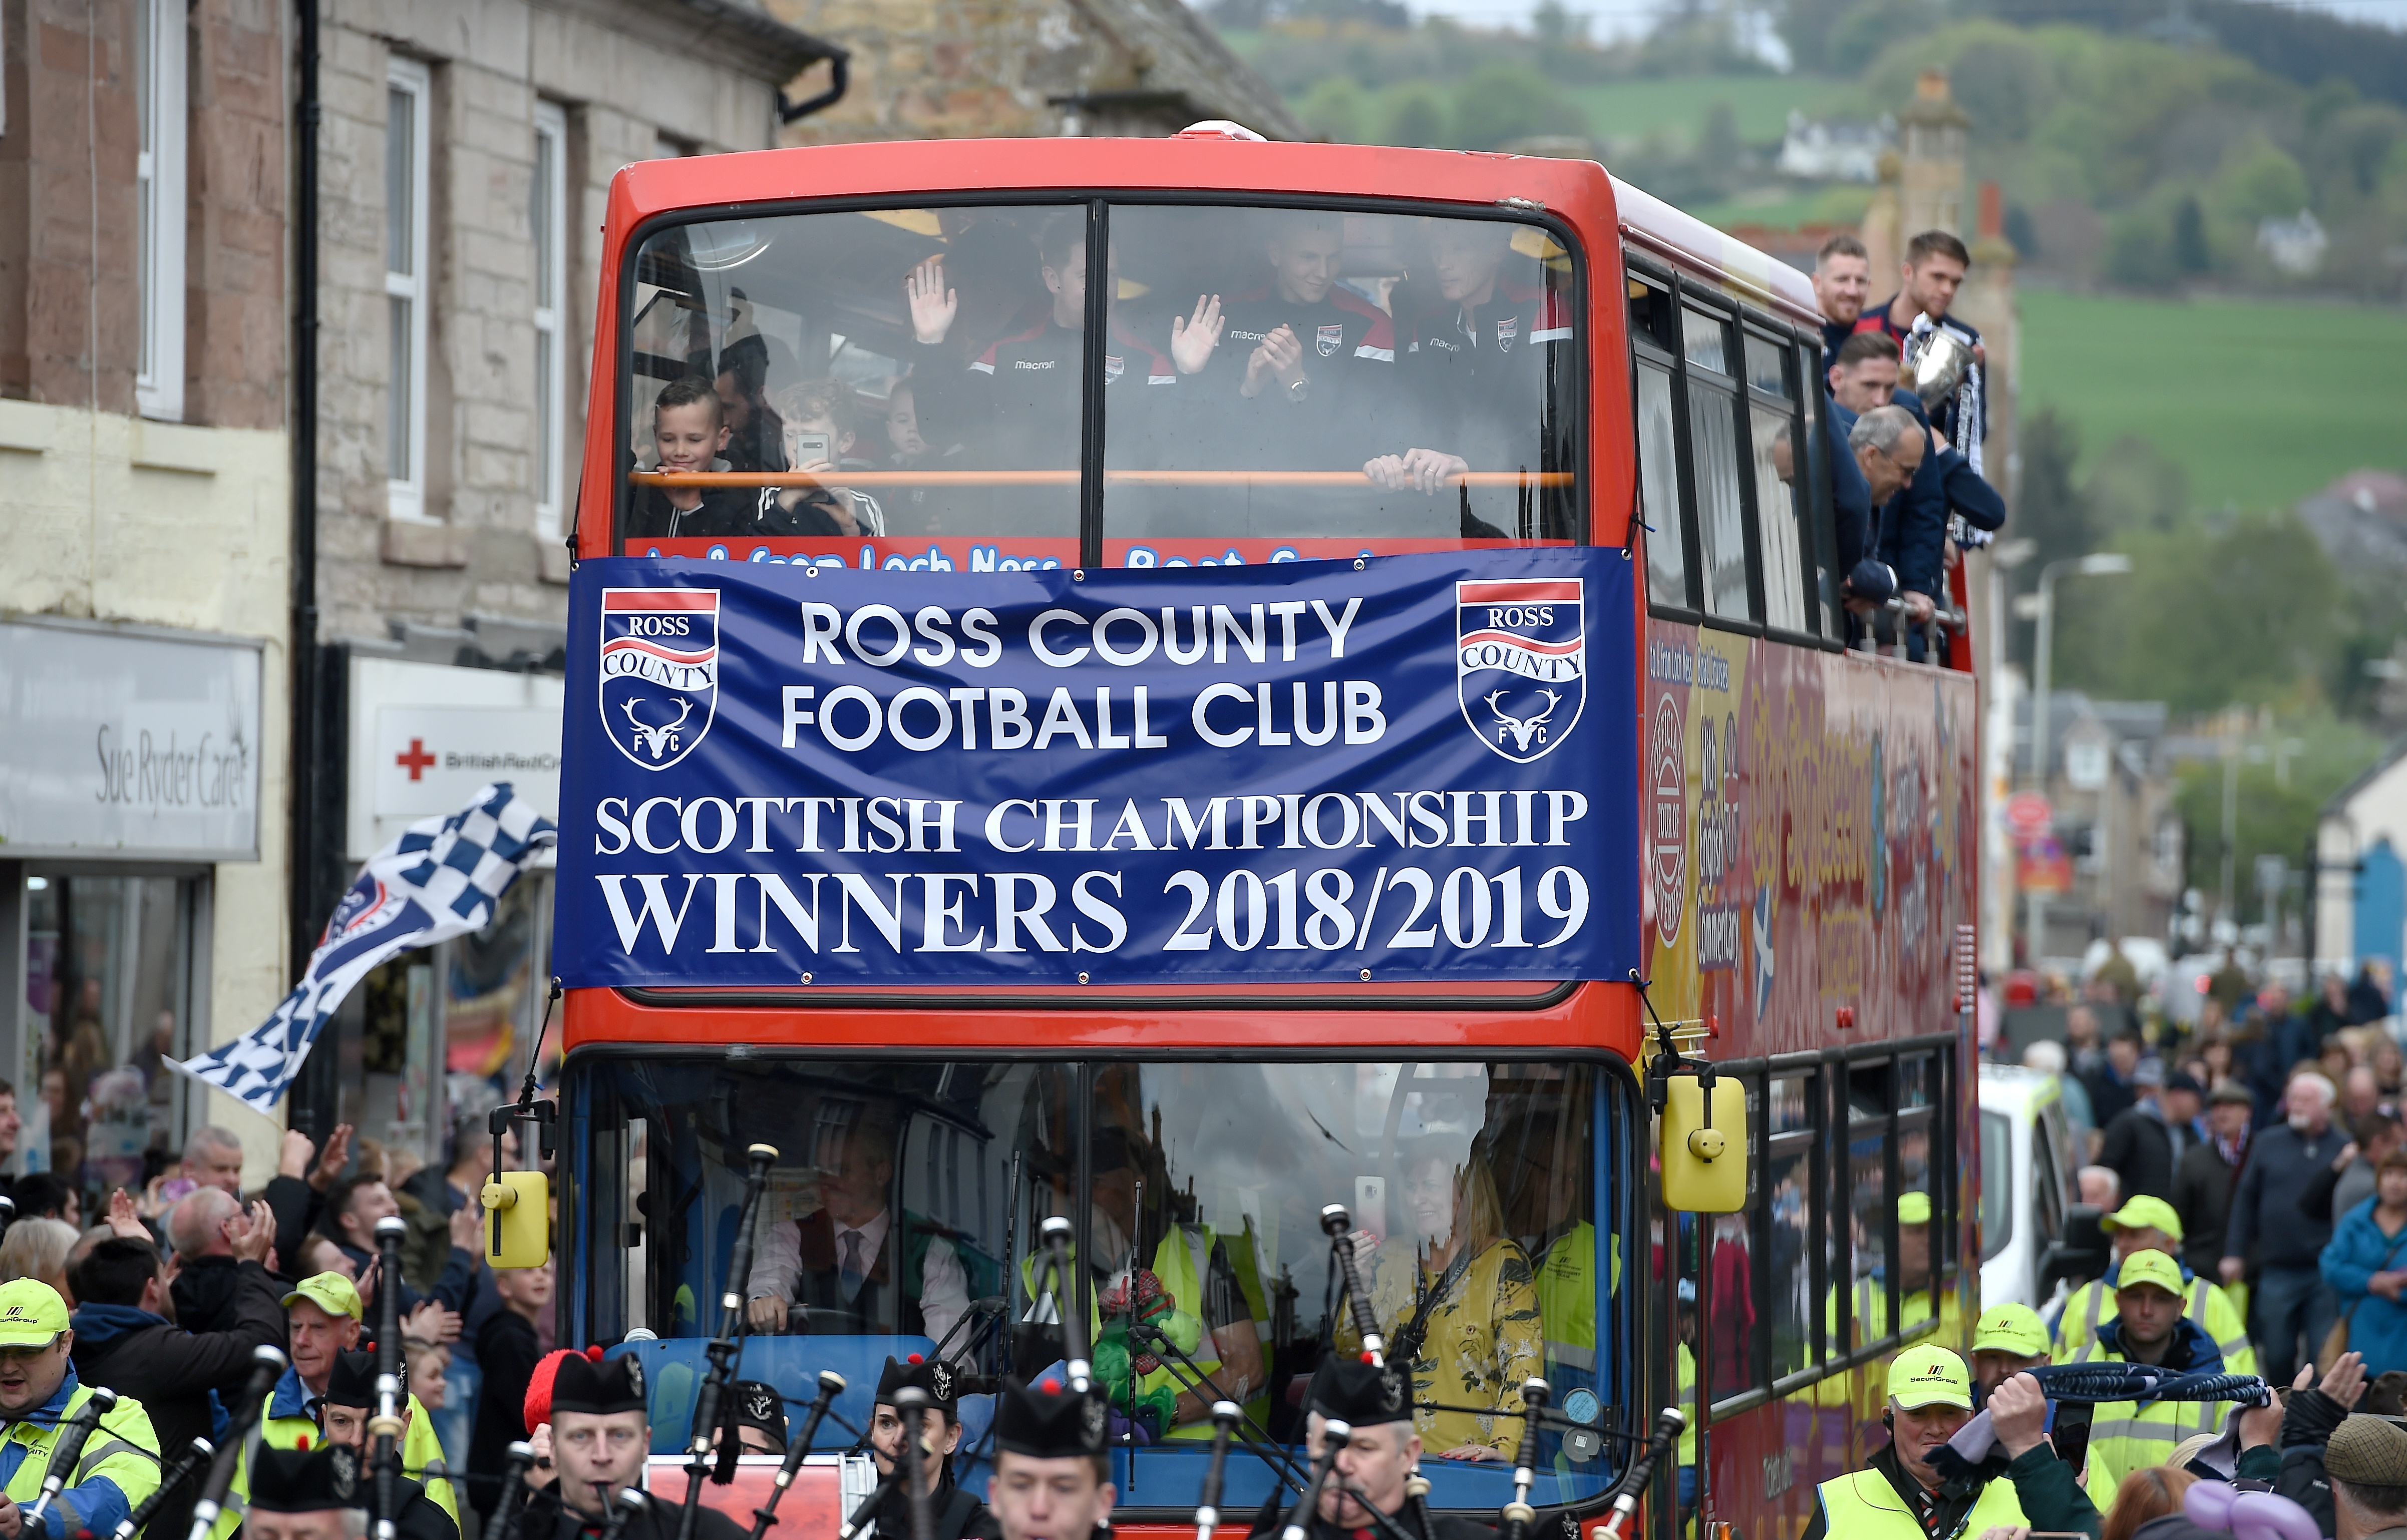 Ross County celebrated their winning of the Scottish Championship with a party in Victoria Park followed by an open top bus parade through Dingwall on Saturday afternoon to show off their silverware. Picture by Sandy McCook.